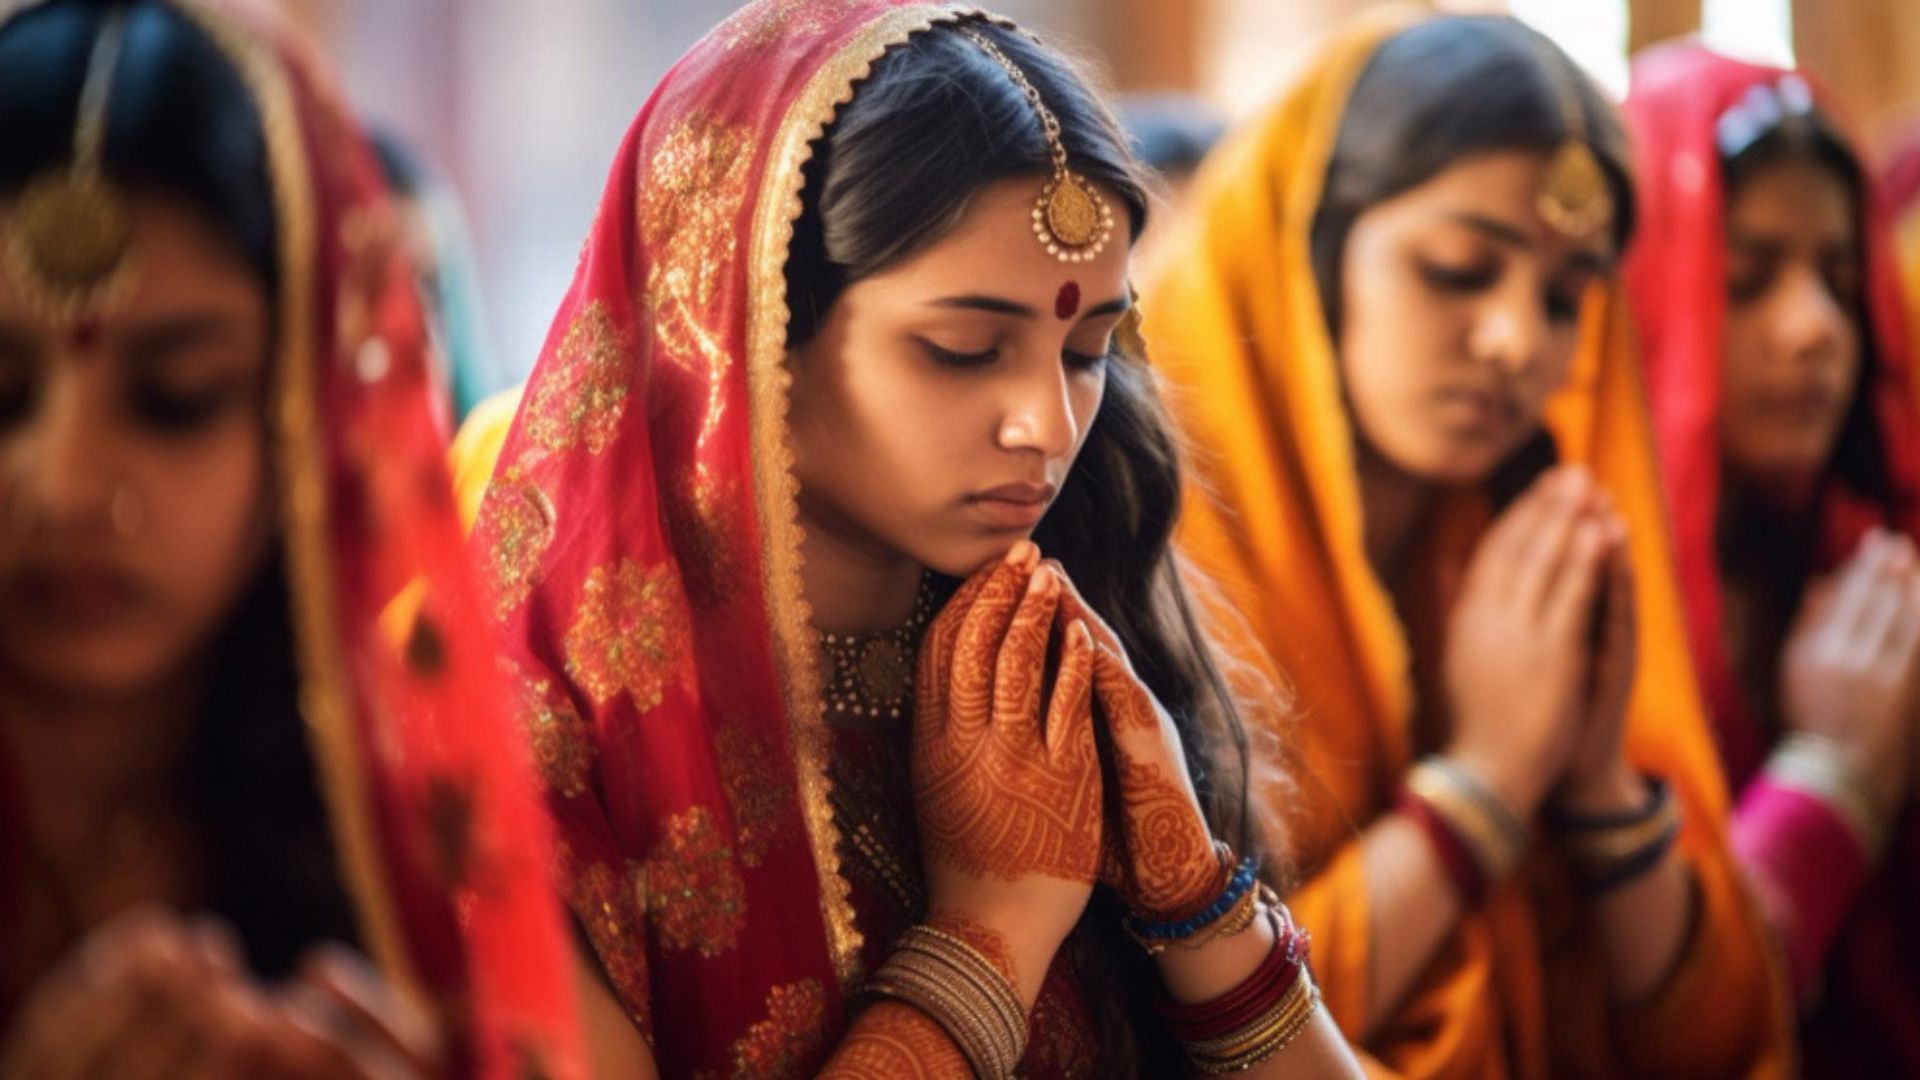 Dowry: A Lingering Practice and the Quest for Eradication